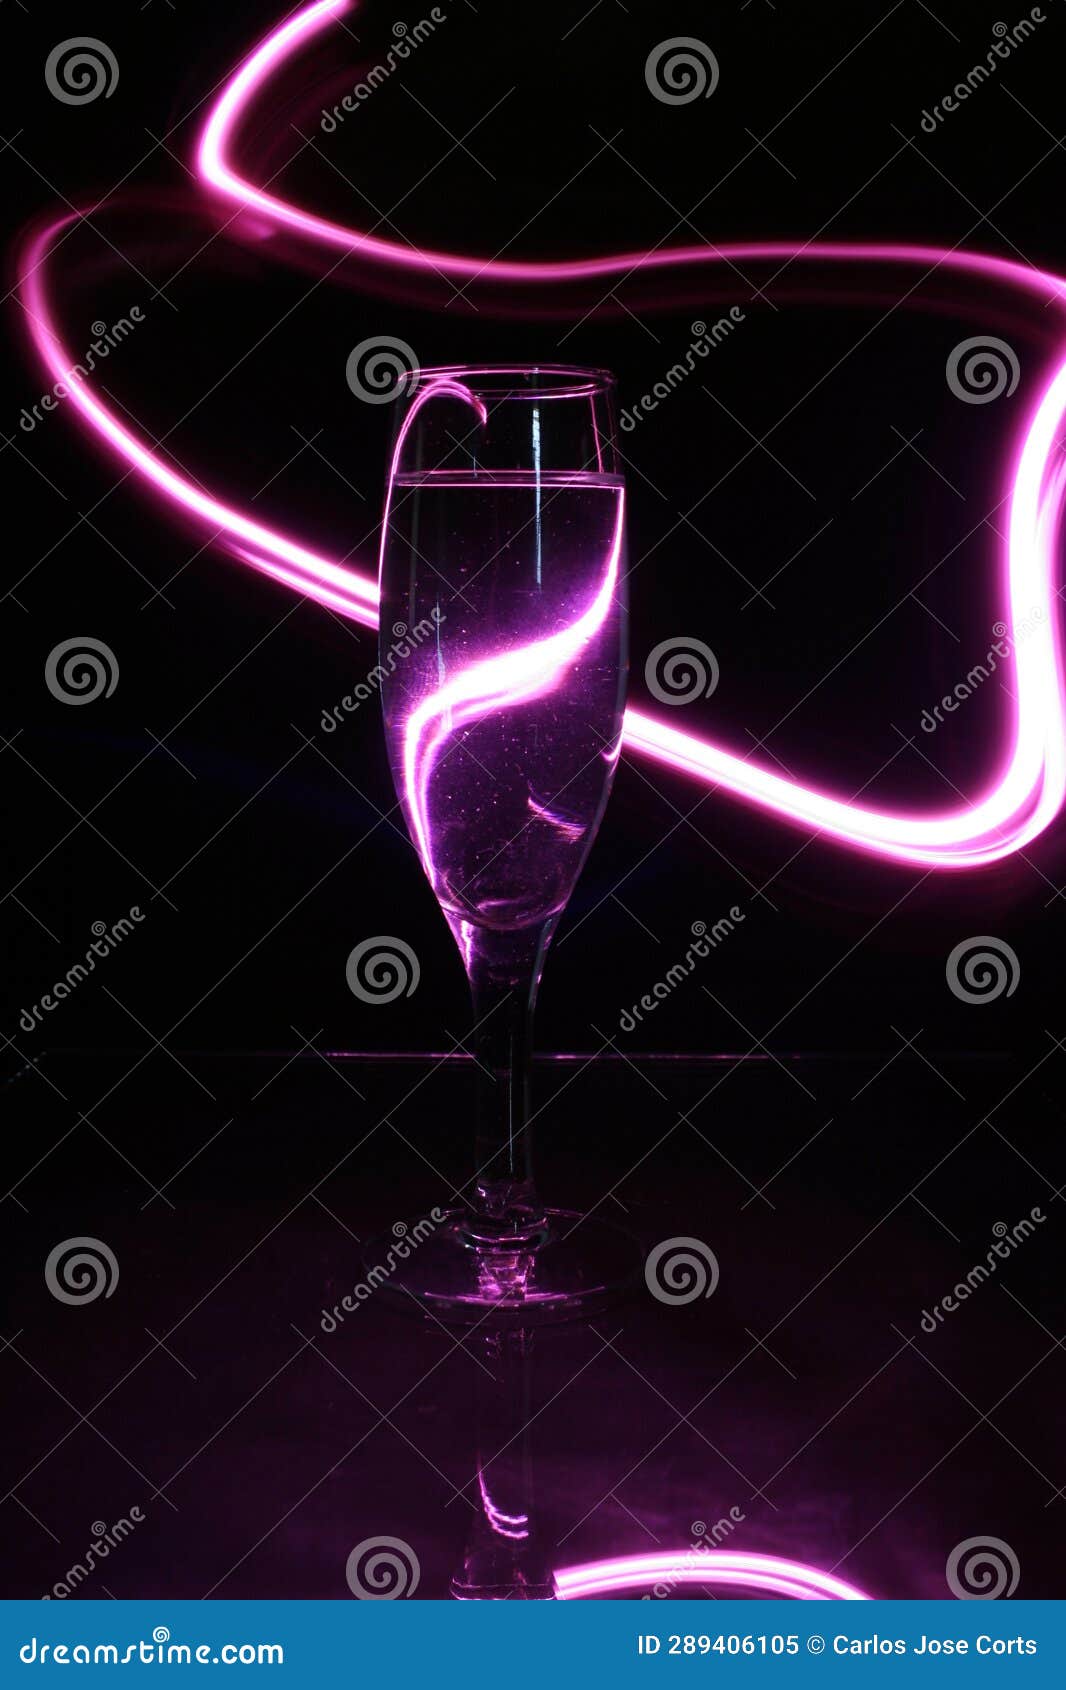 the champagne or champagne glass surrounded by pink lines of light